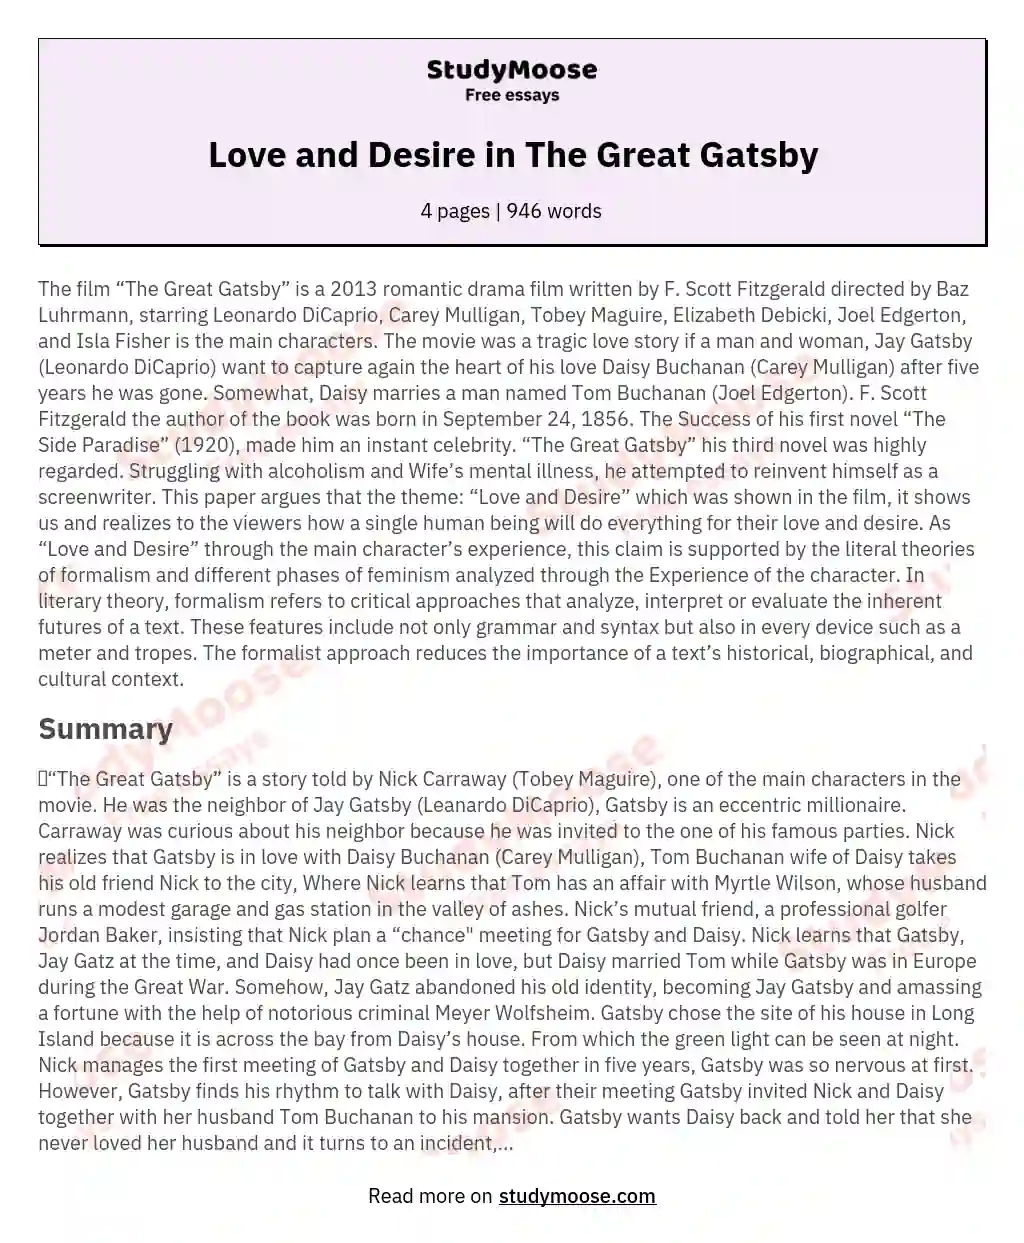 Love and Desire in The Great Gatsby